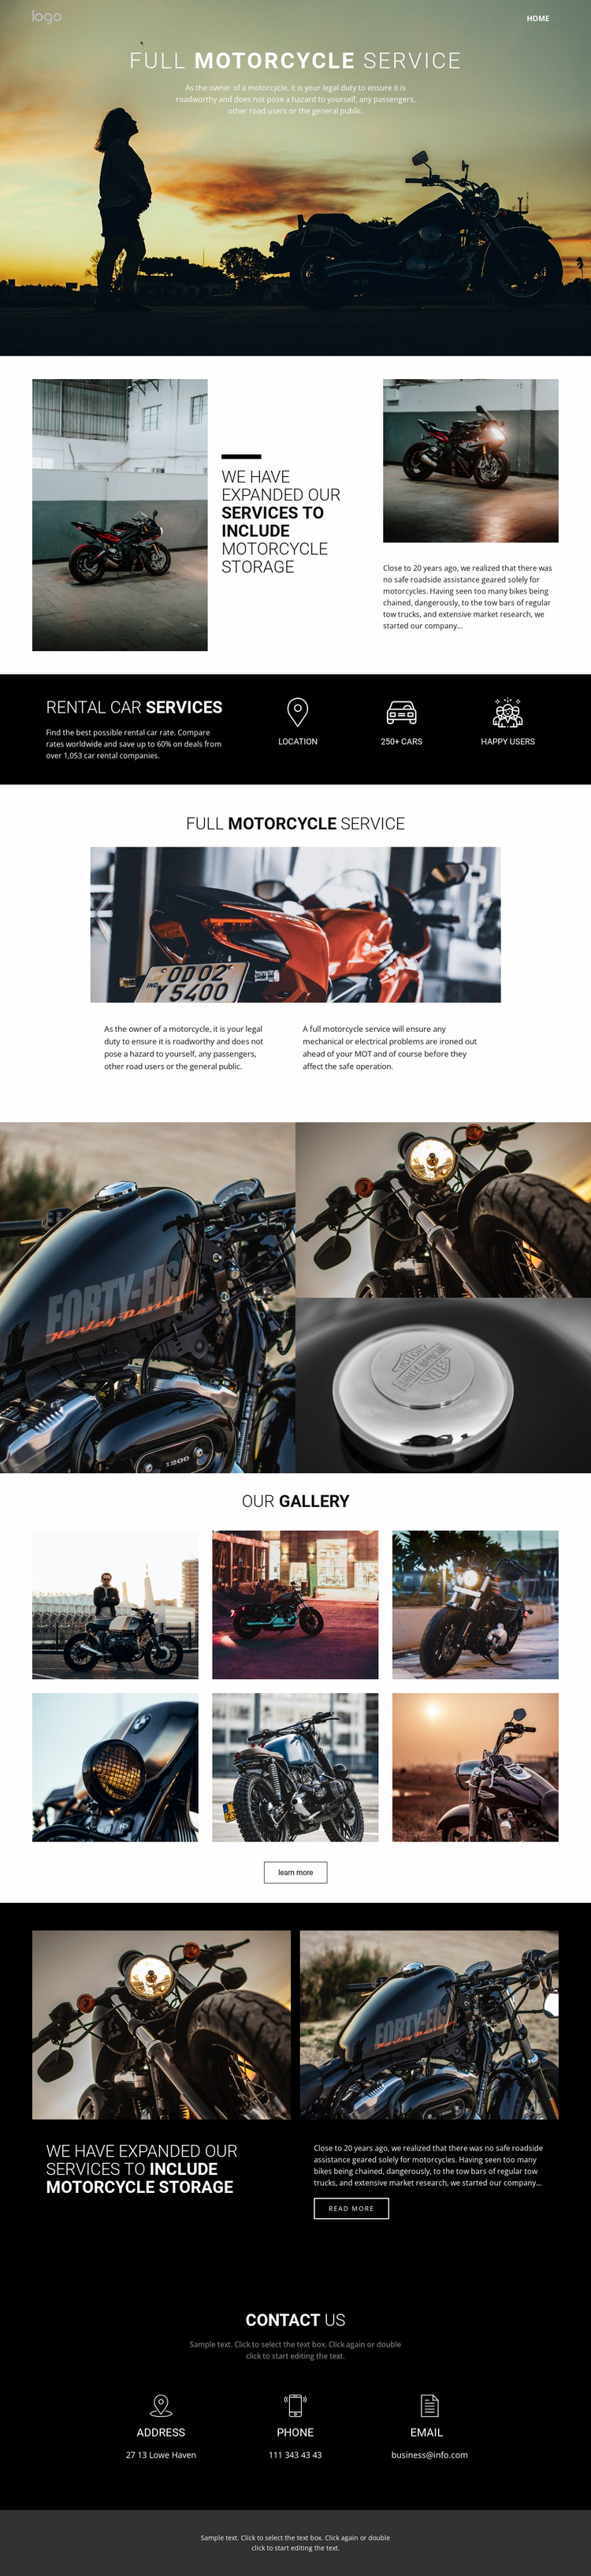 Caring for cycles and cars Website Design